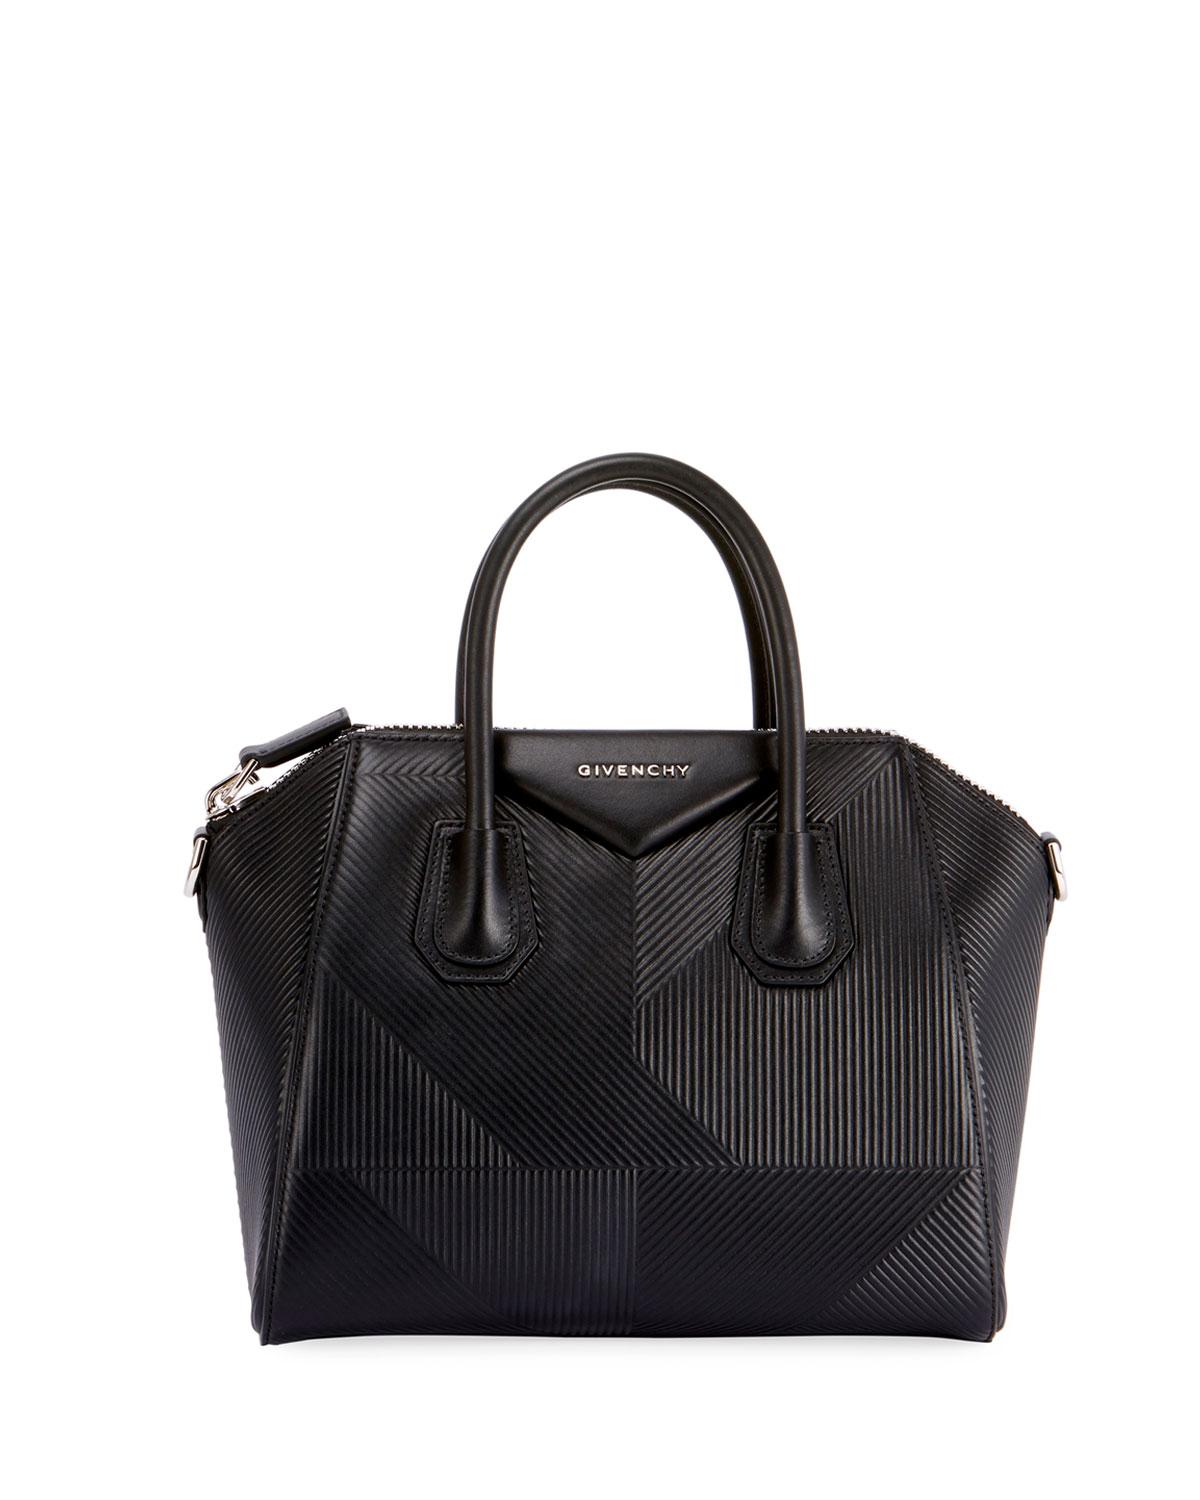 Givenchy Antigona Small Embossed Leather Satchel Bag in Black - Lyst